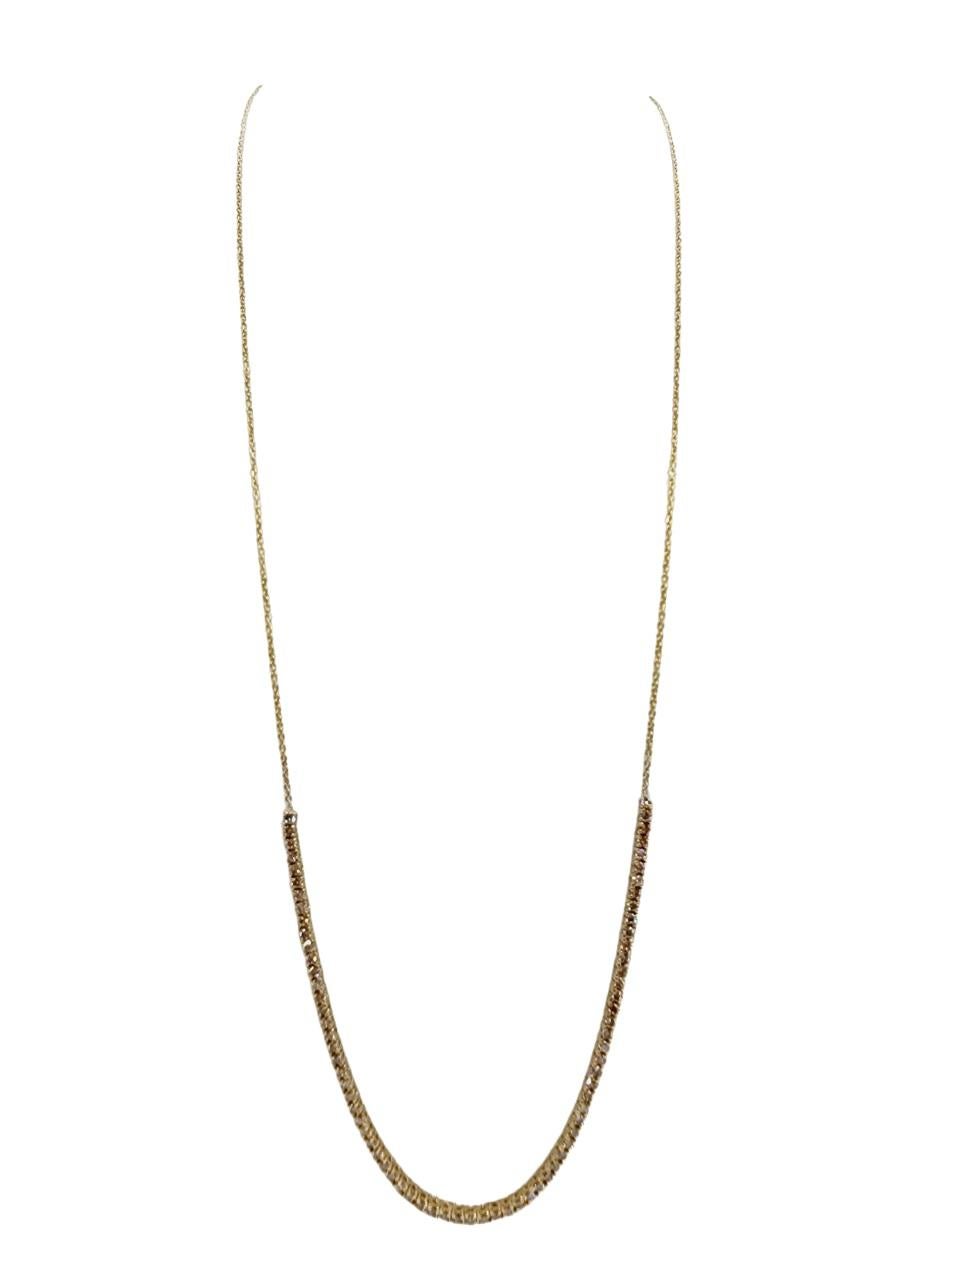 1.65 Carat Mini Diamond Necklace Chain 14 Karat Yellow Gold 22'' In New Condition For Sale In Great Neck, NY